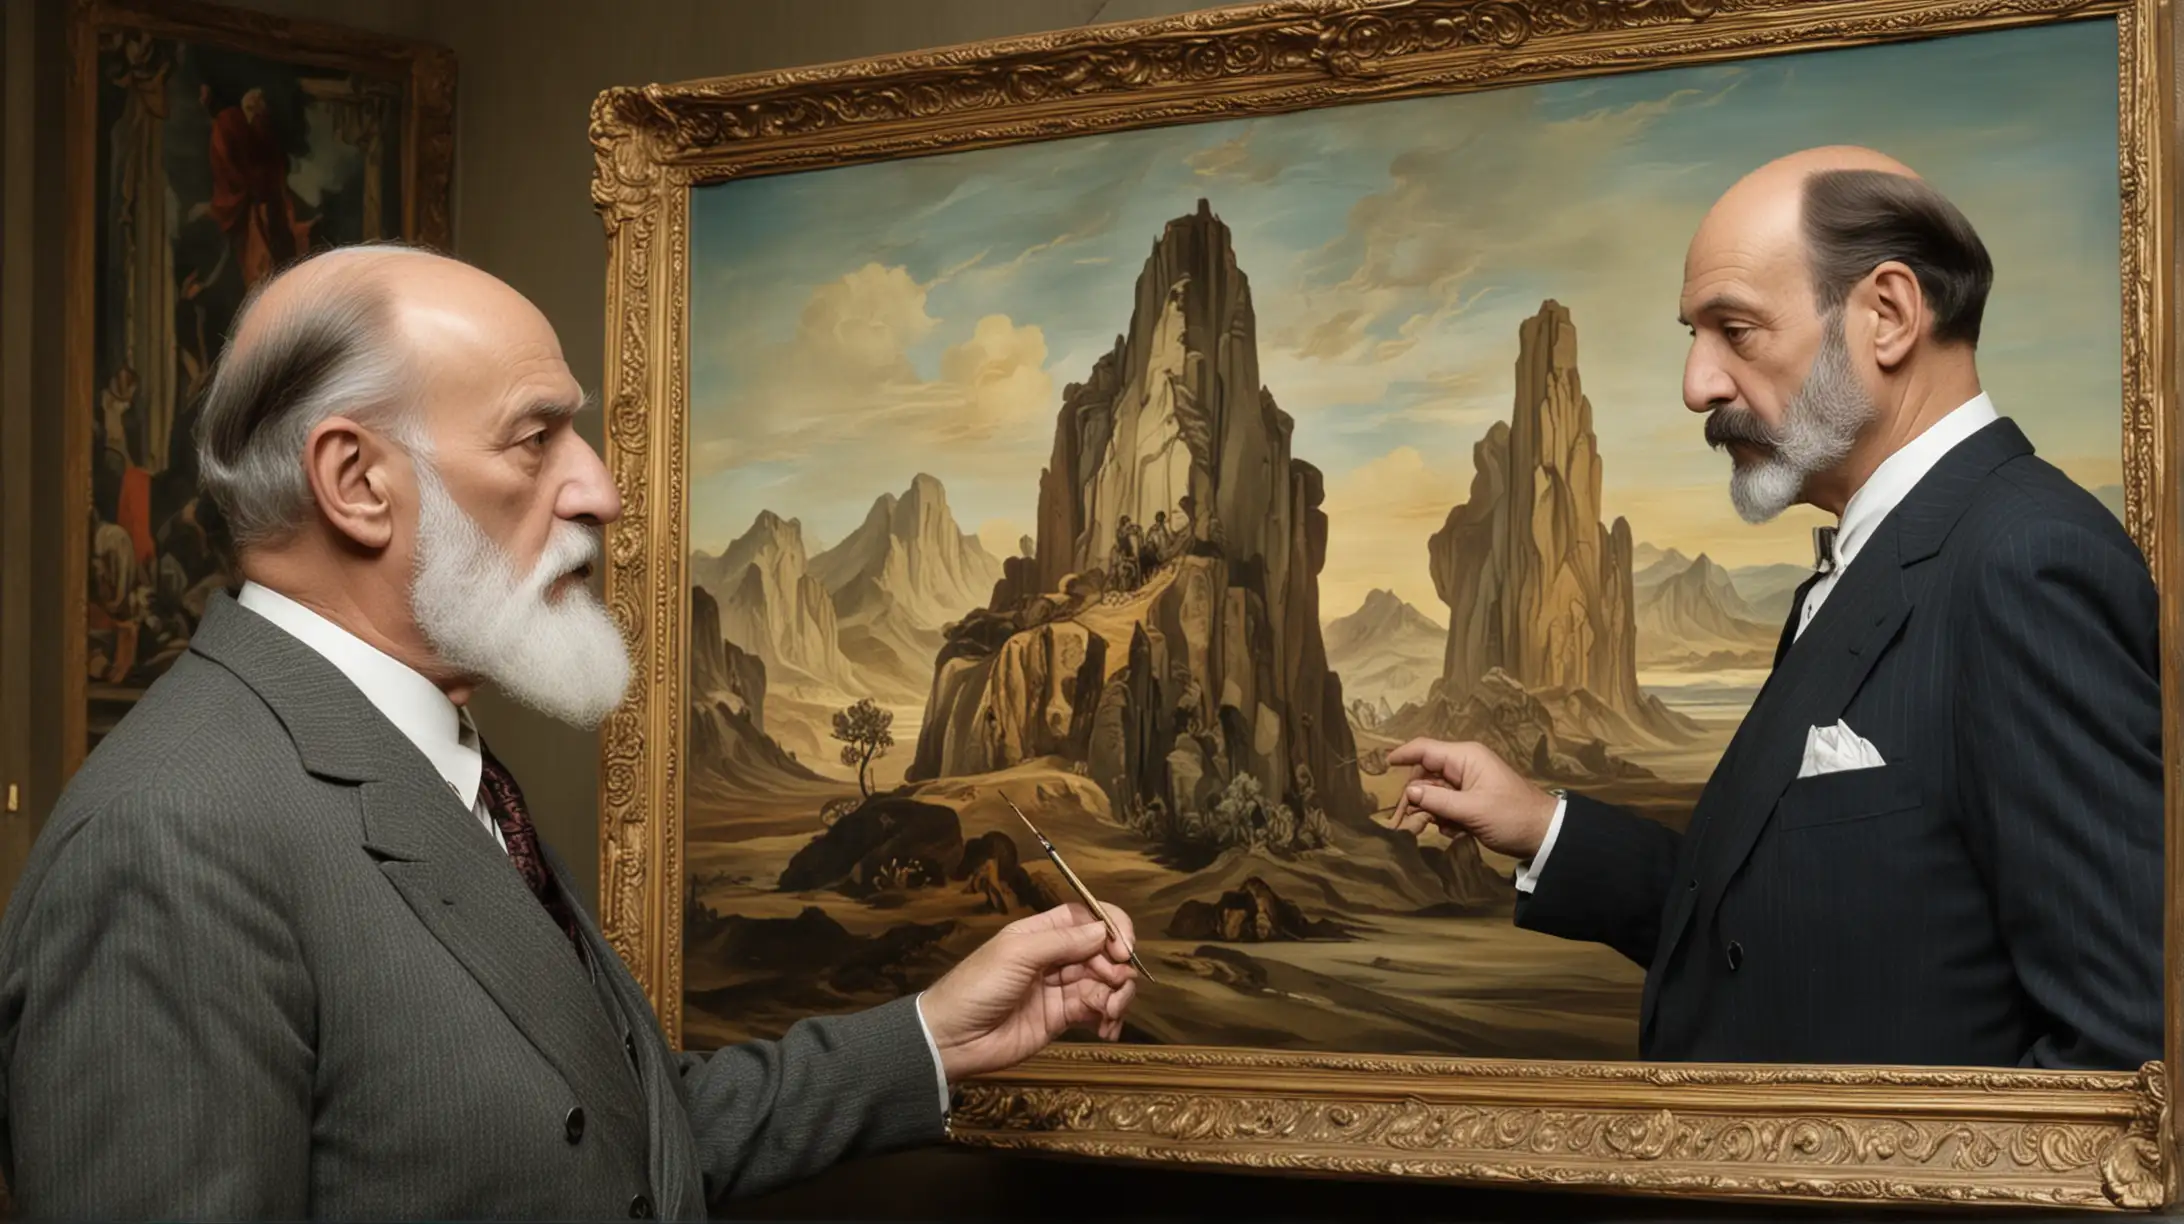 Year 1917. Sigmund Freud rSigmund Freud looks at a painting by Salvador Dali. Styled like an old hand-colored silent film.